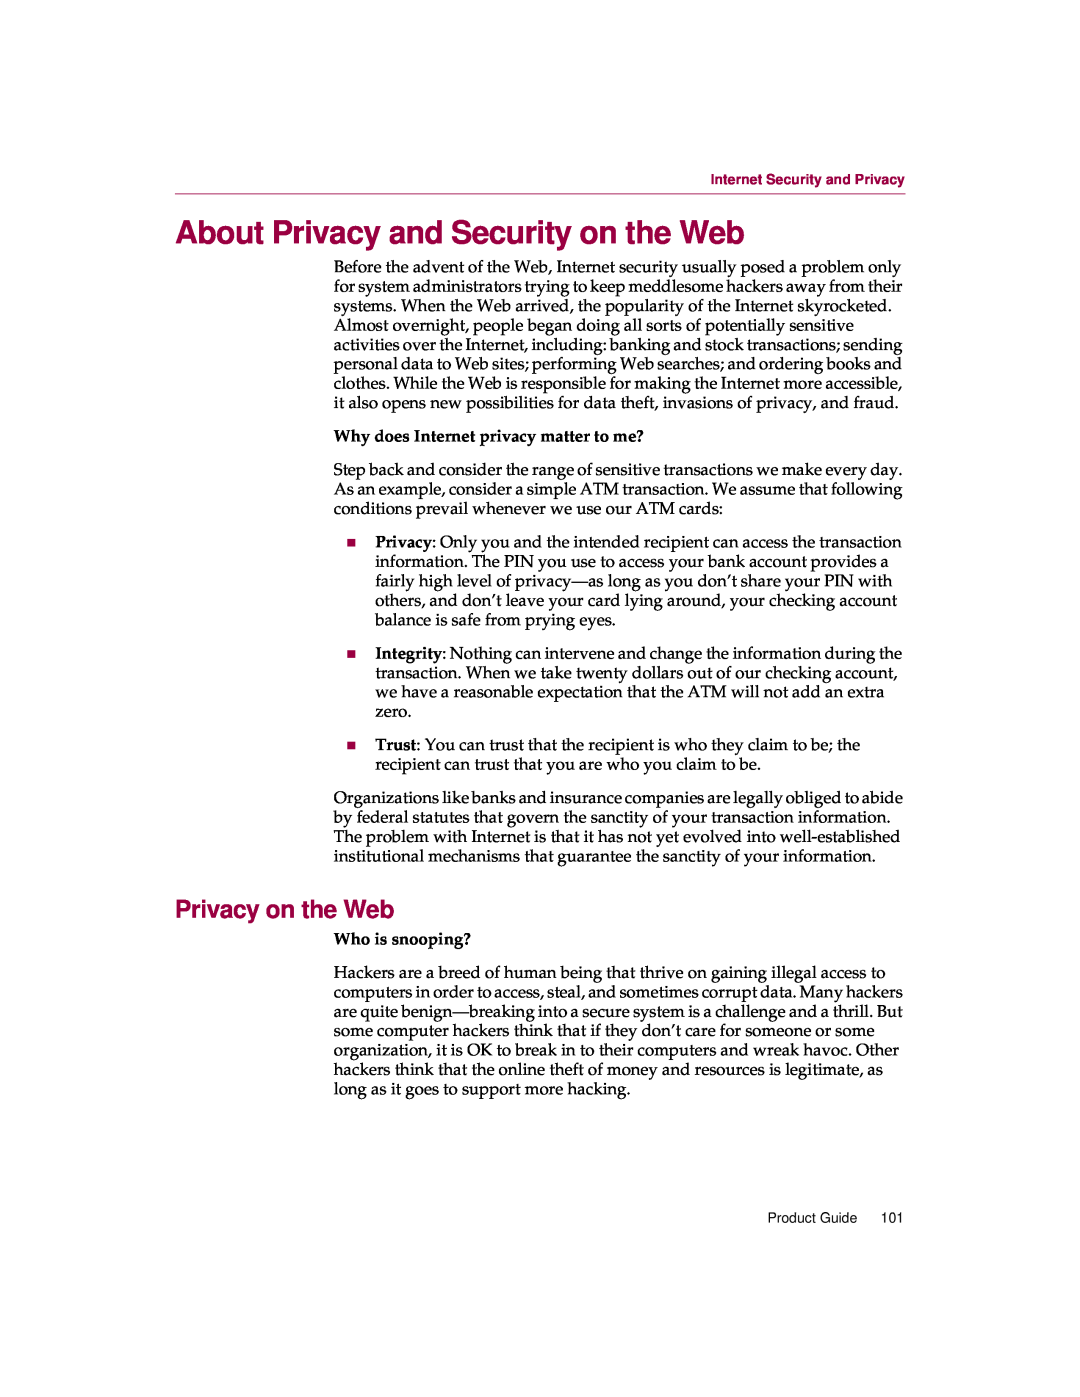 McAfee 5 manual About Privacy and Security on the Web, Privacy on the Web, Why does Internet privacy matter to me? 